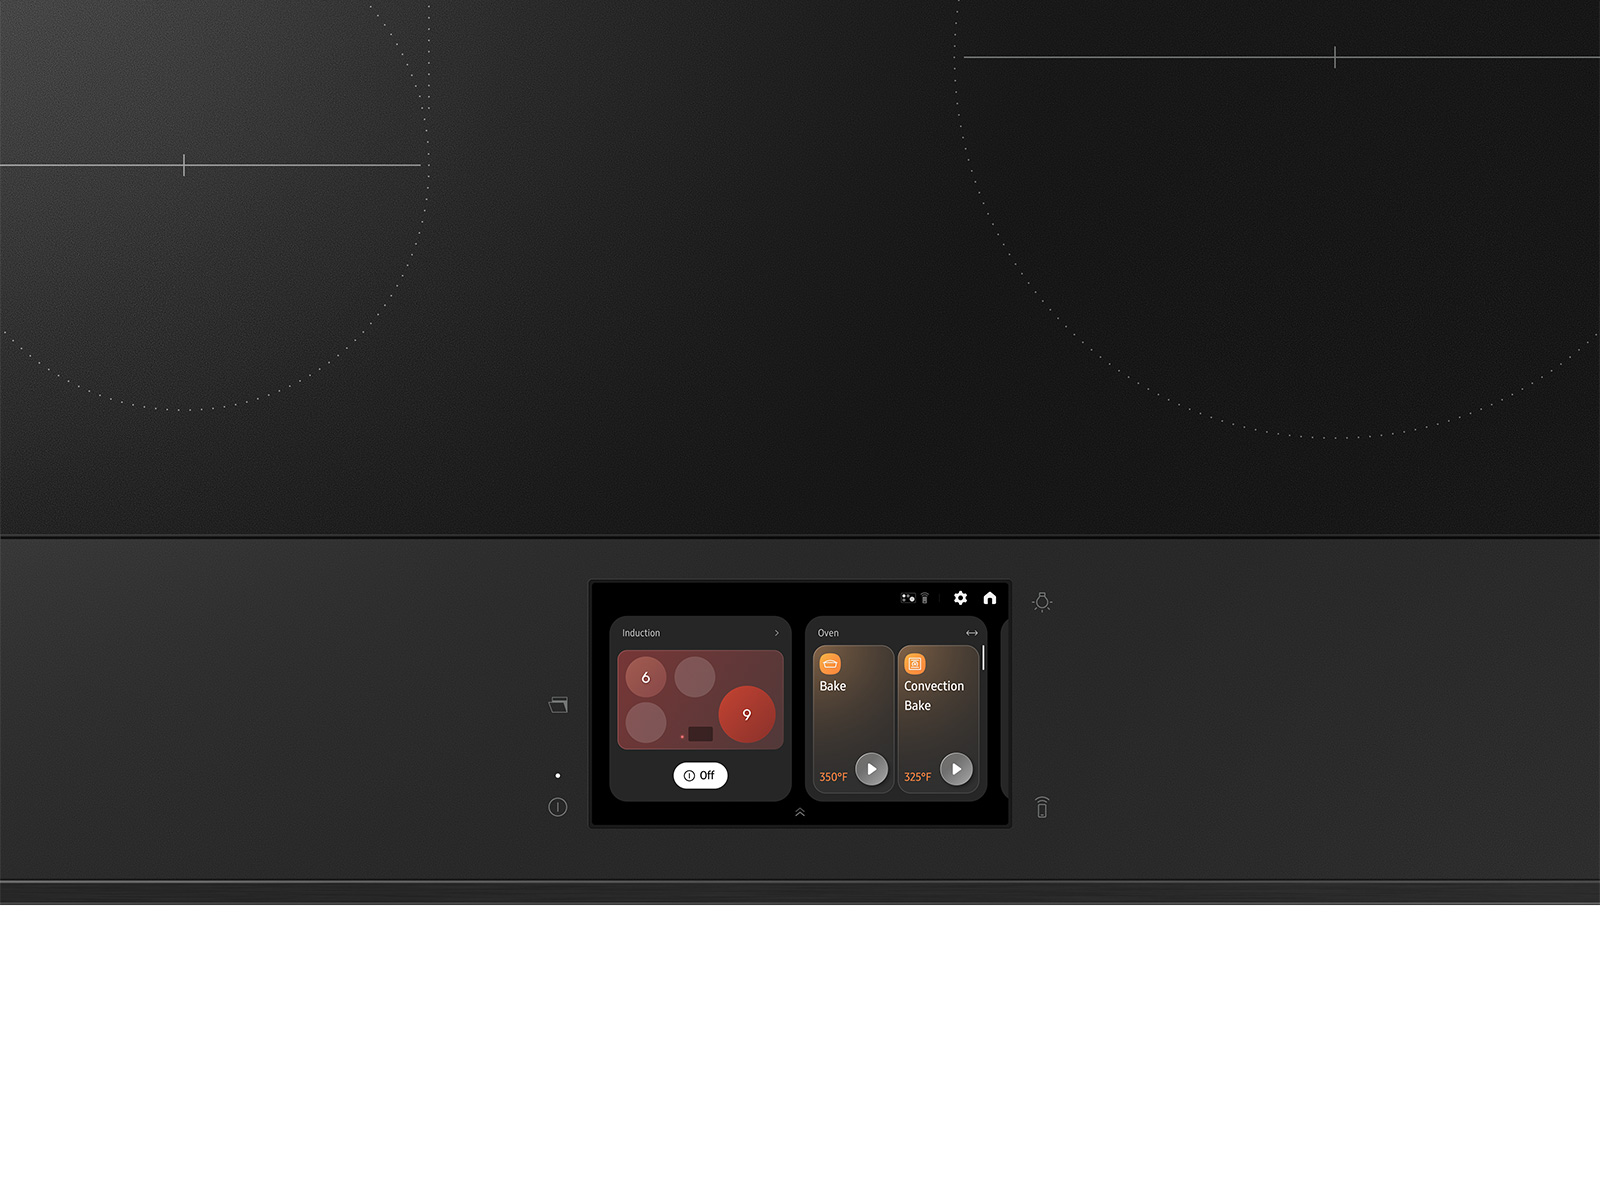 Thumbnail image of Bespoke 6.3 cu. ft. Smart Slide-In Induction Range with AI Home & Smart Oven Camera in Stainless Steel